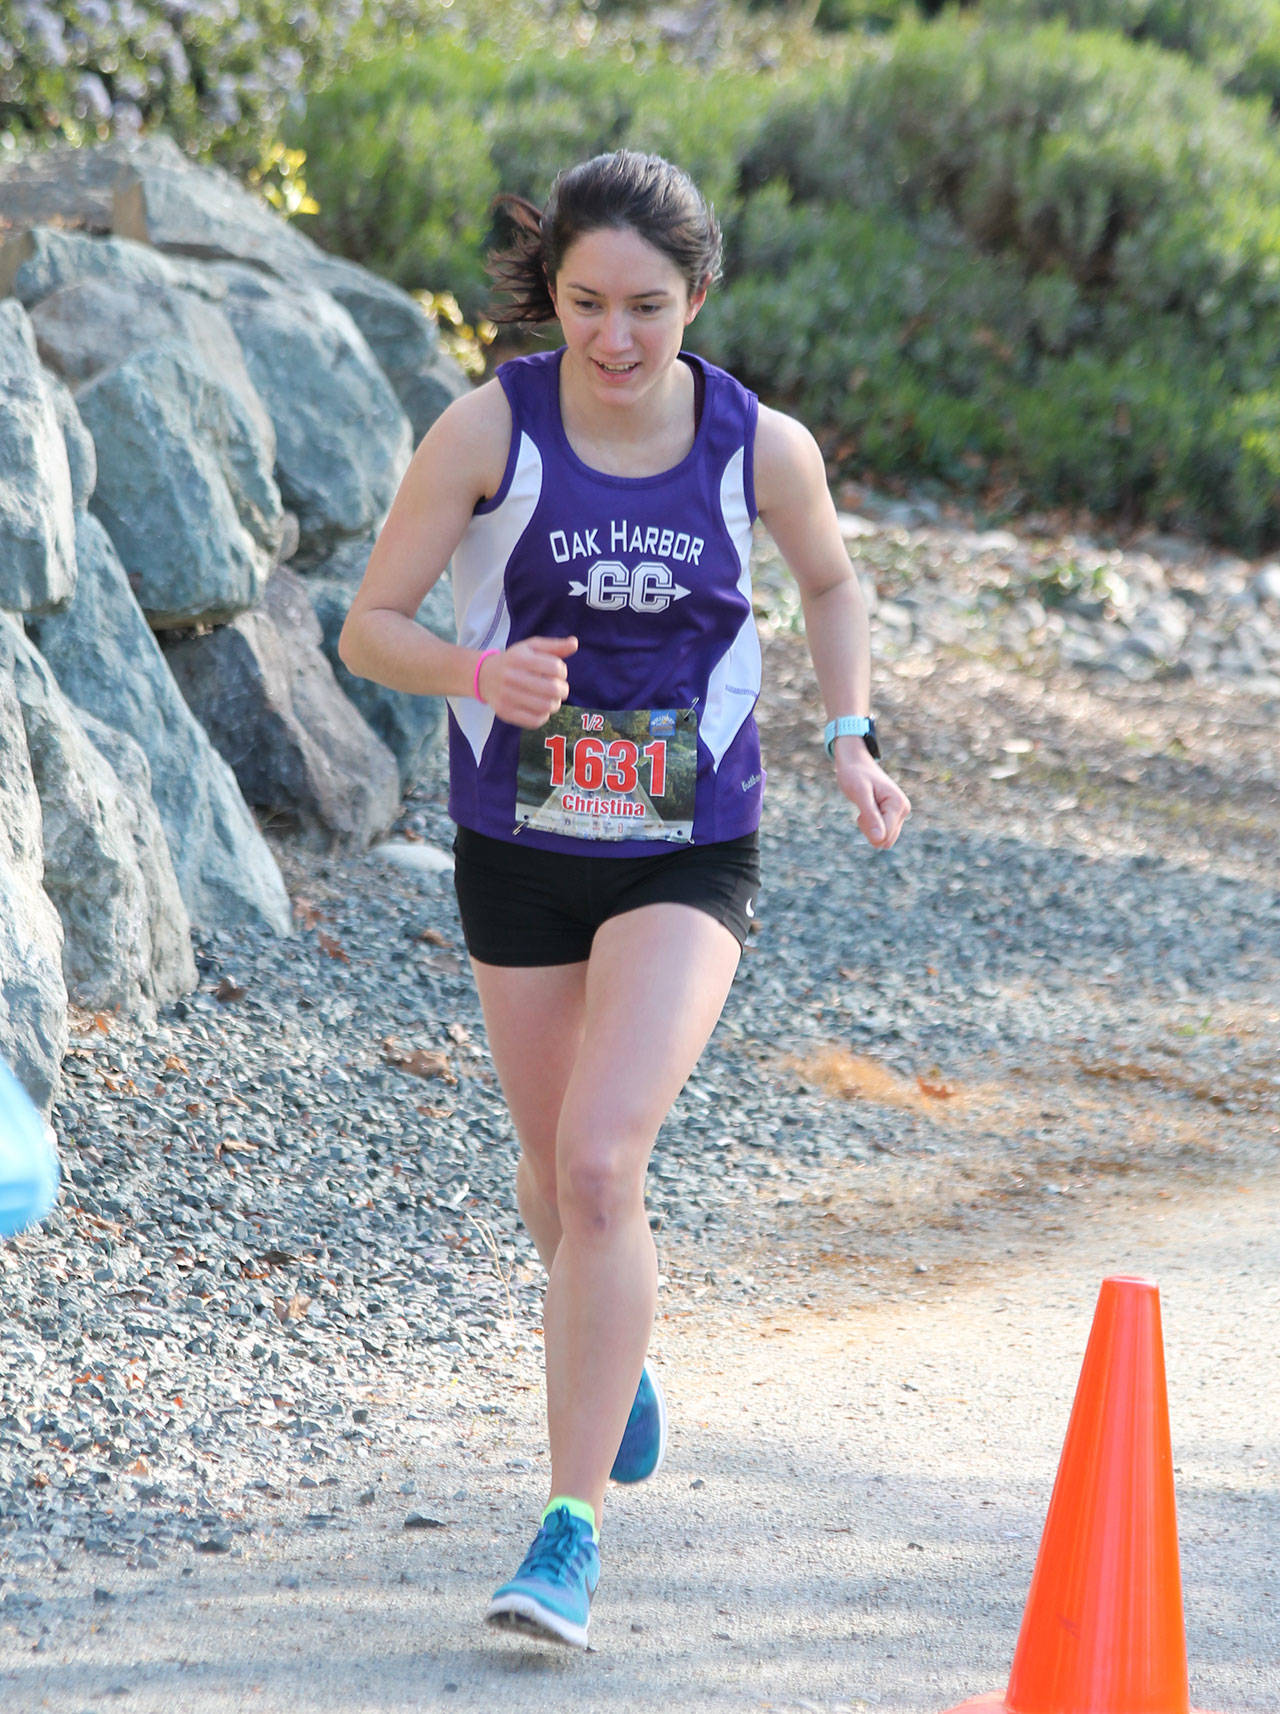 Oak Harbor High School graduate Christina Wicker was the top local female runner in the half marathon Sunday. (Photo by Jim Waller/Whidbey News-Times)